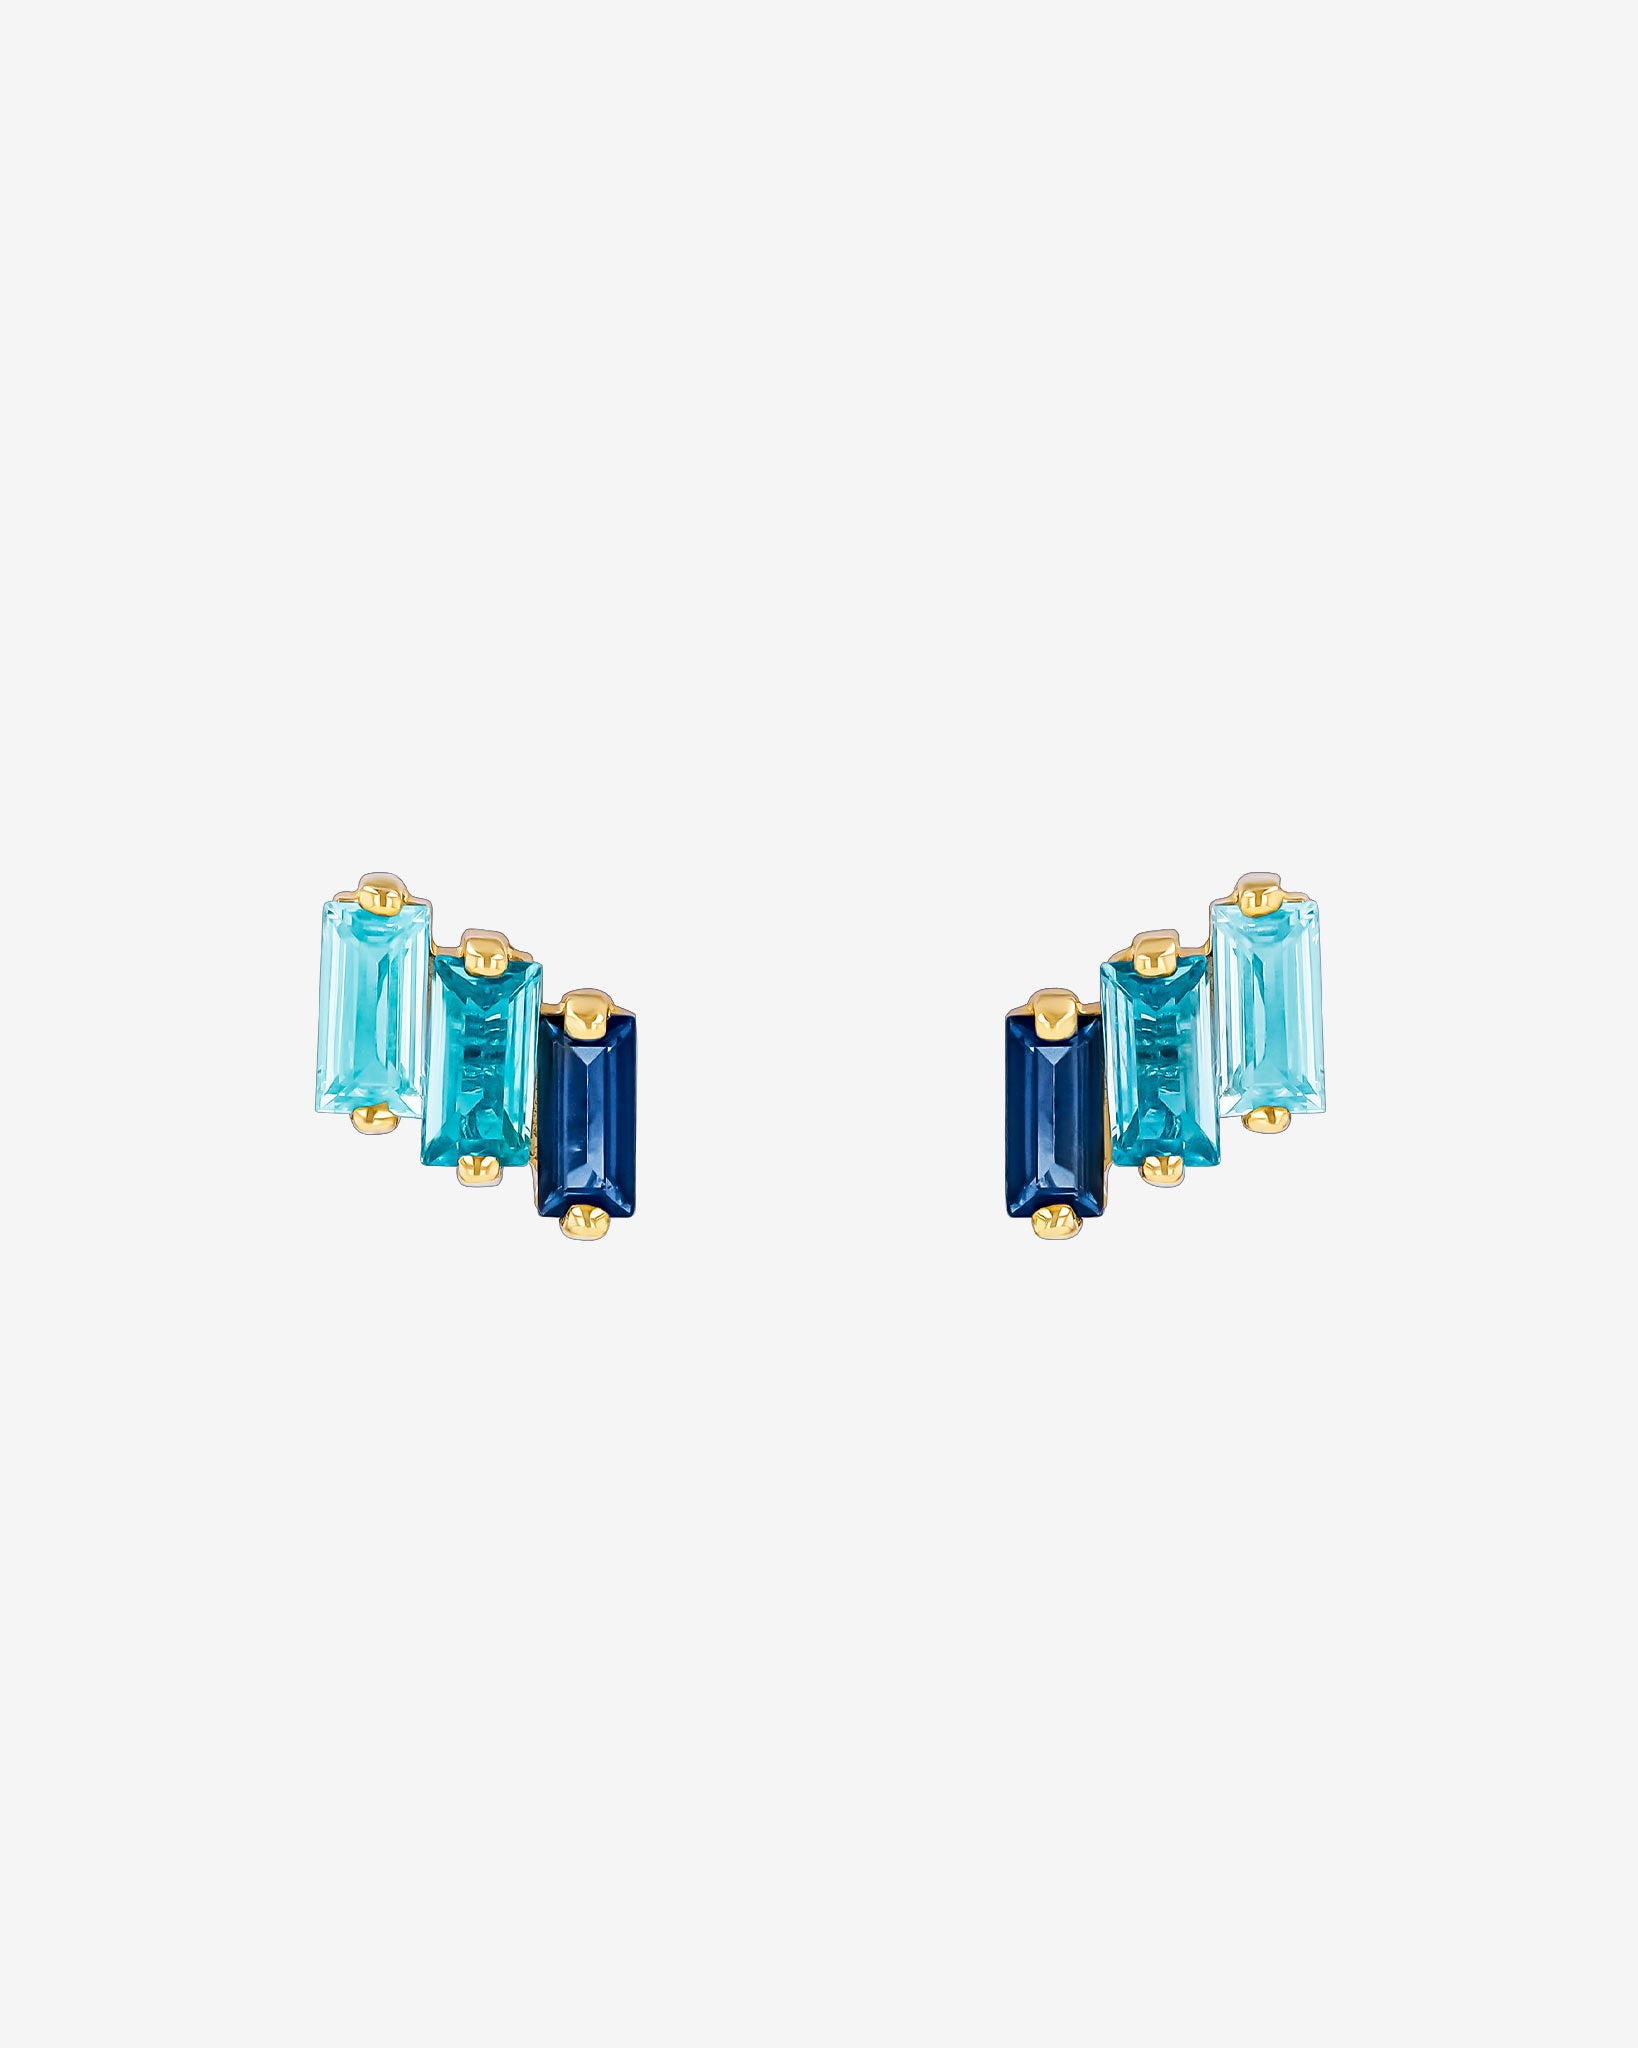 Kalan By Suzanne Kalan Amalfi Blue Ombre Studs in 14k yellow gold